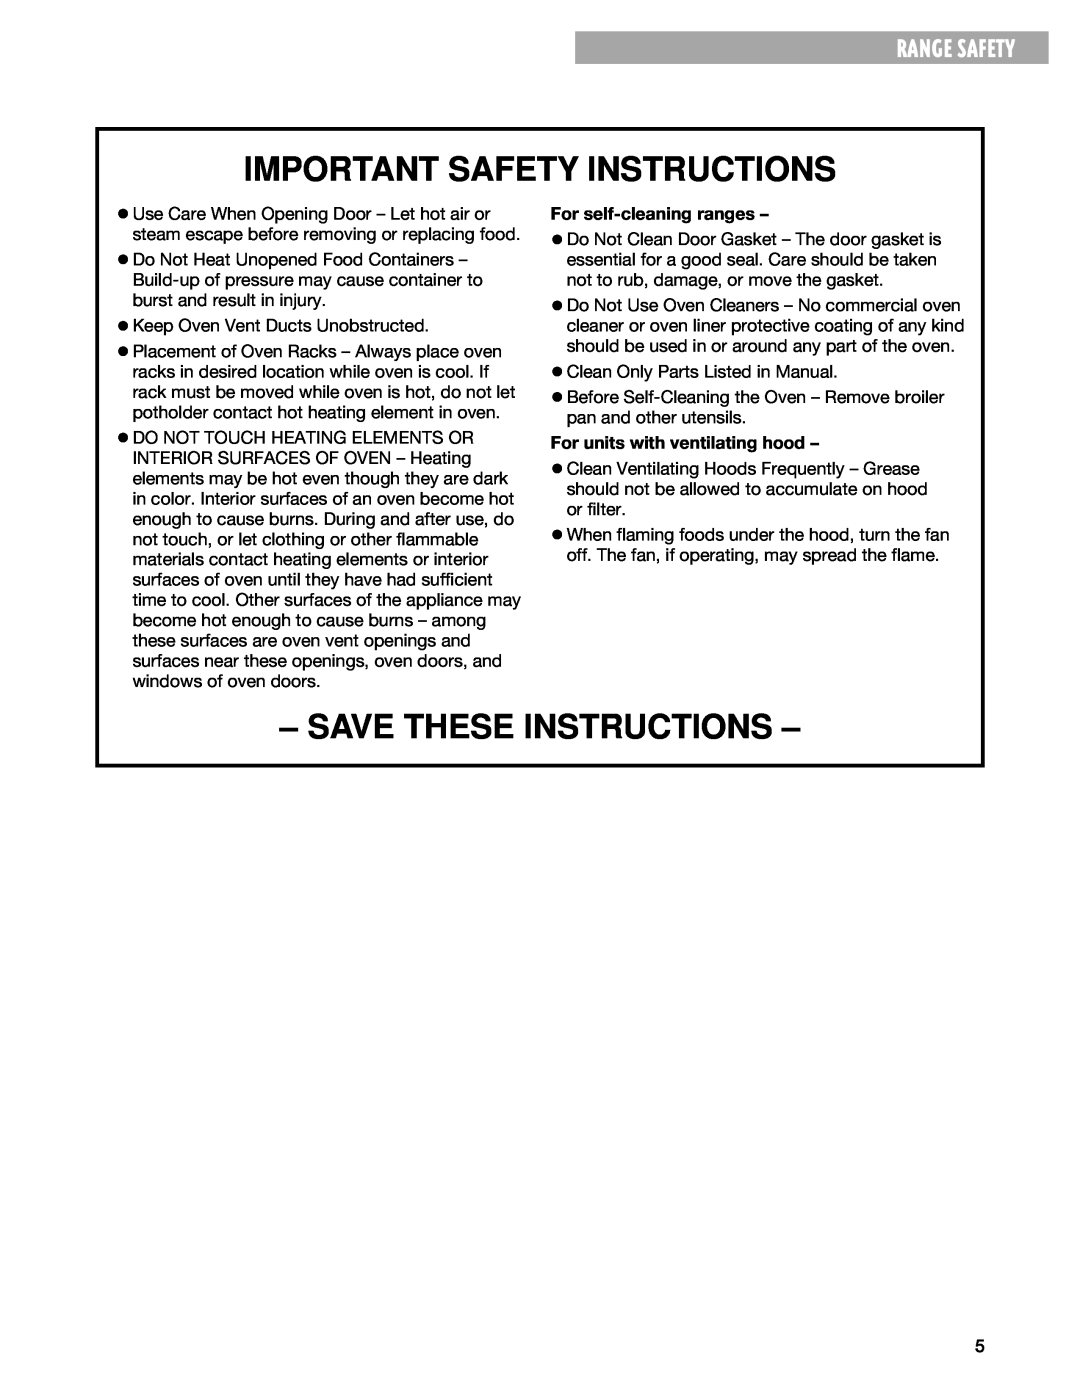 Whirlpool TES325G warranty Important Safety Instructions, Save These Instructions, Range Safety, For self-cleaning ranges 